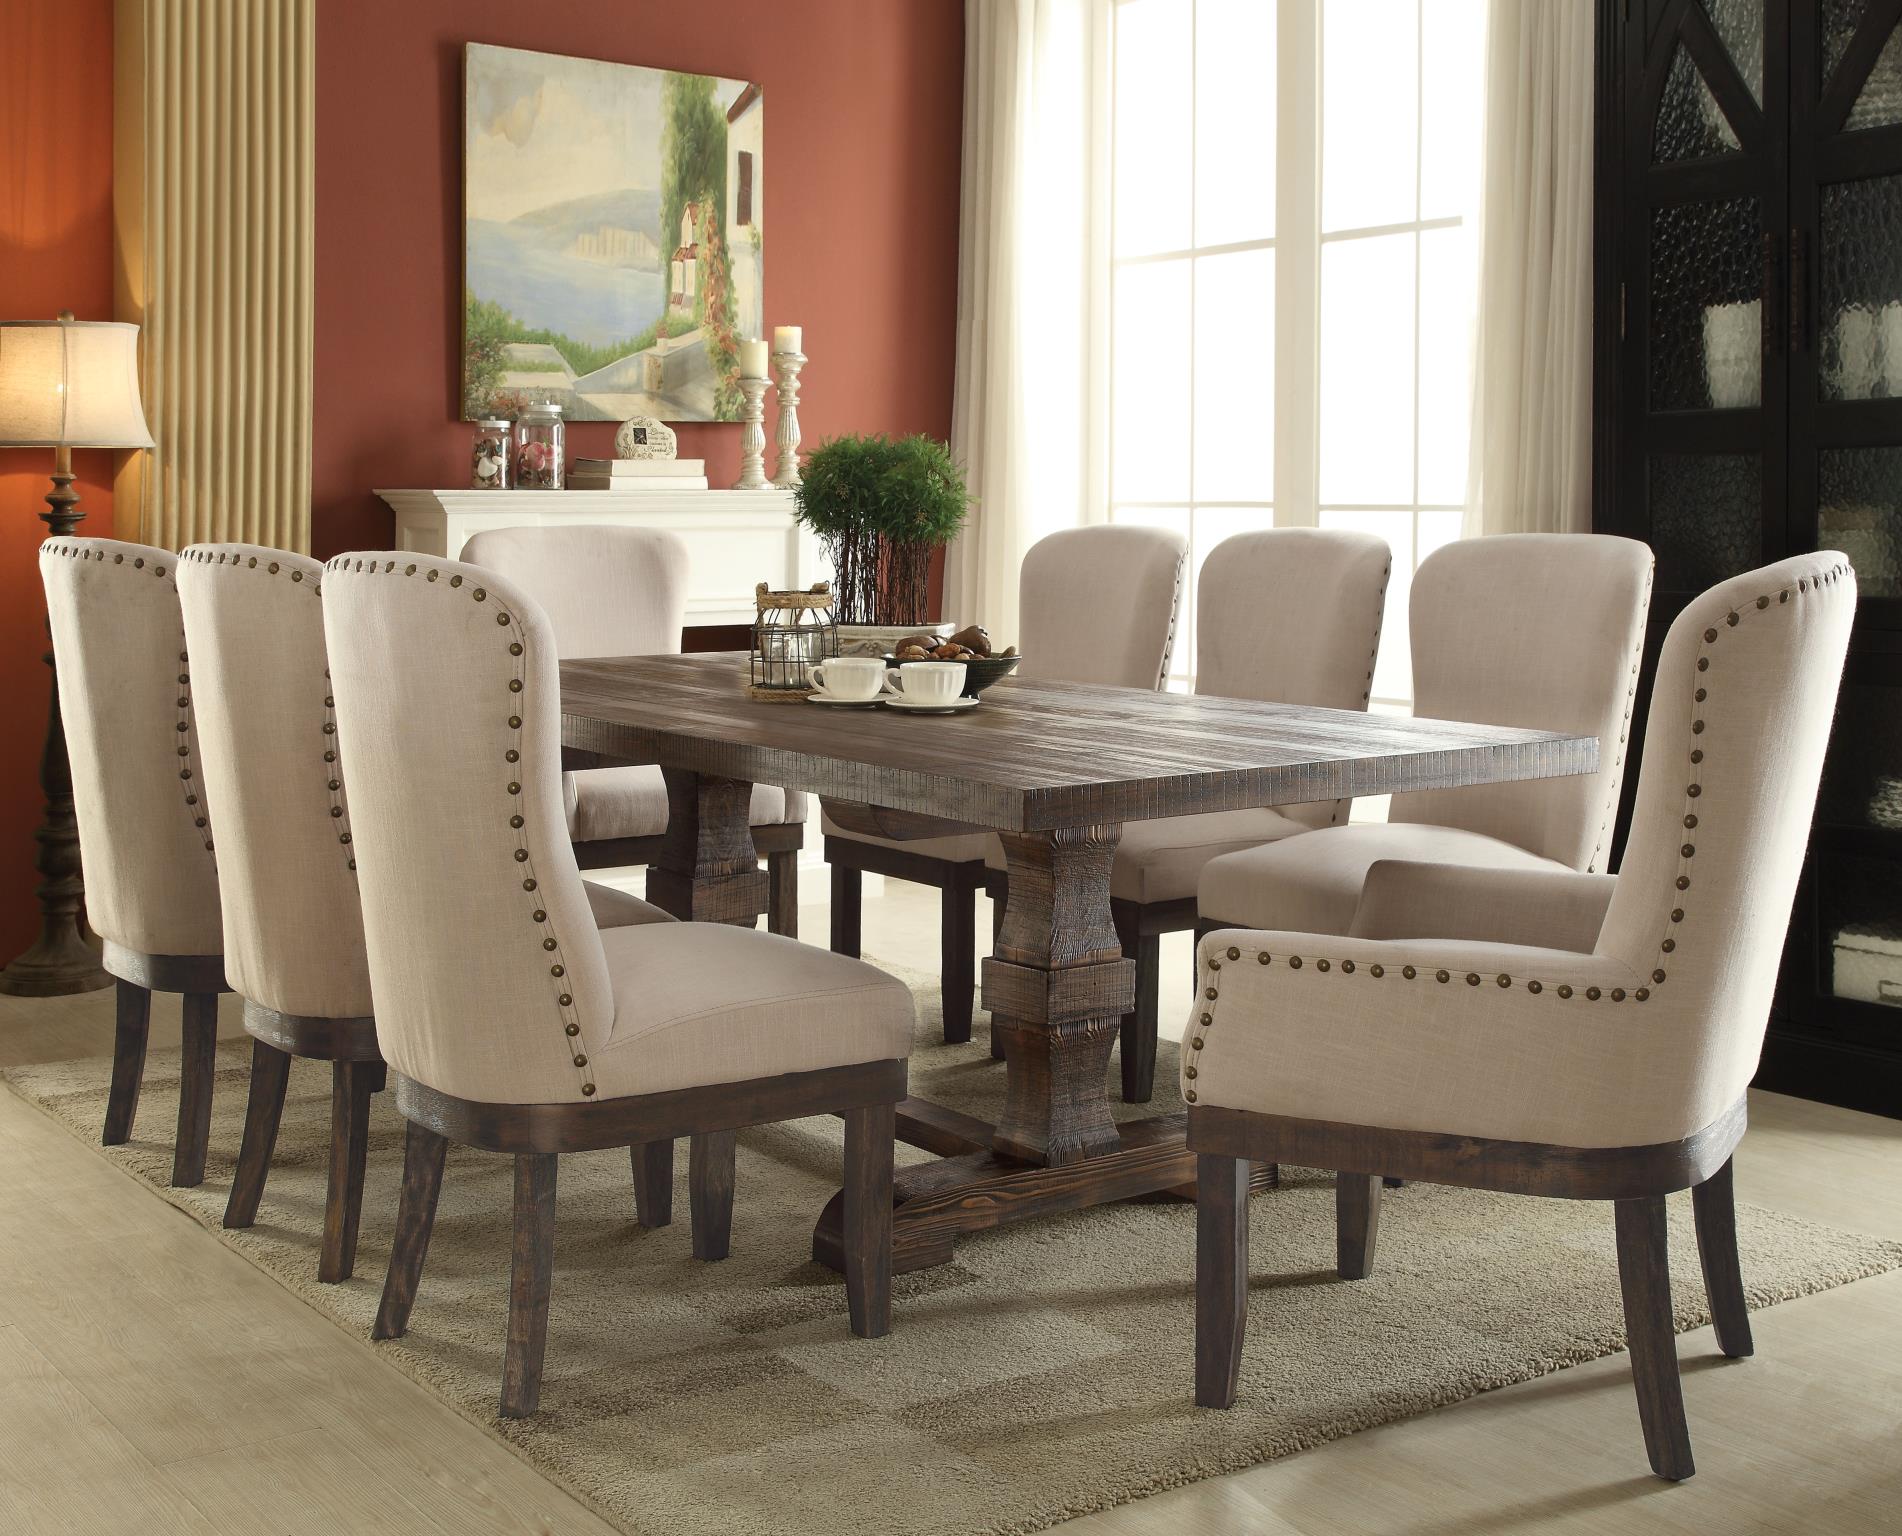 Complete Dining Table Set w/ 8 Chairs